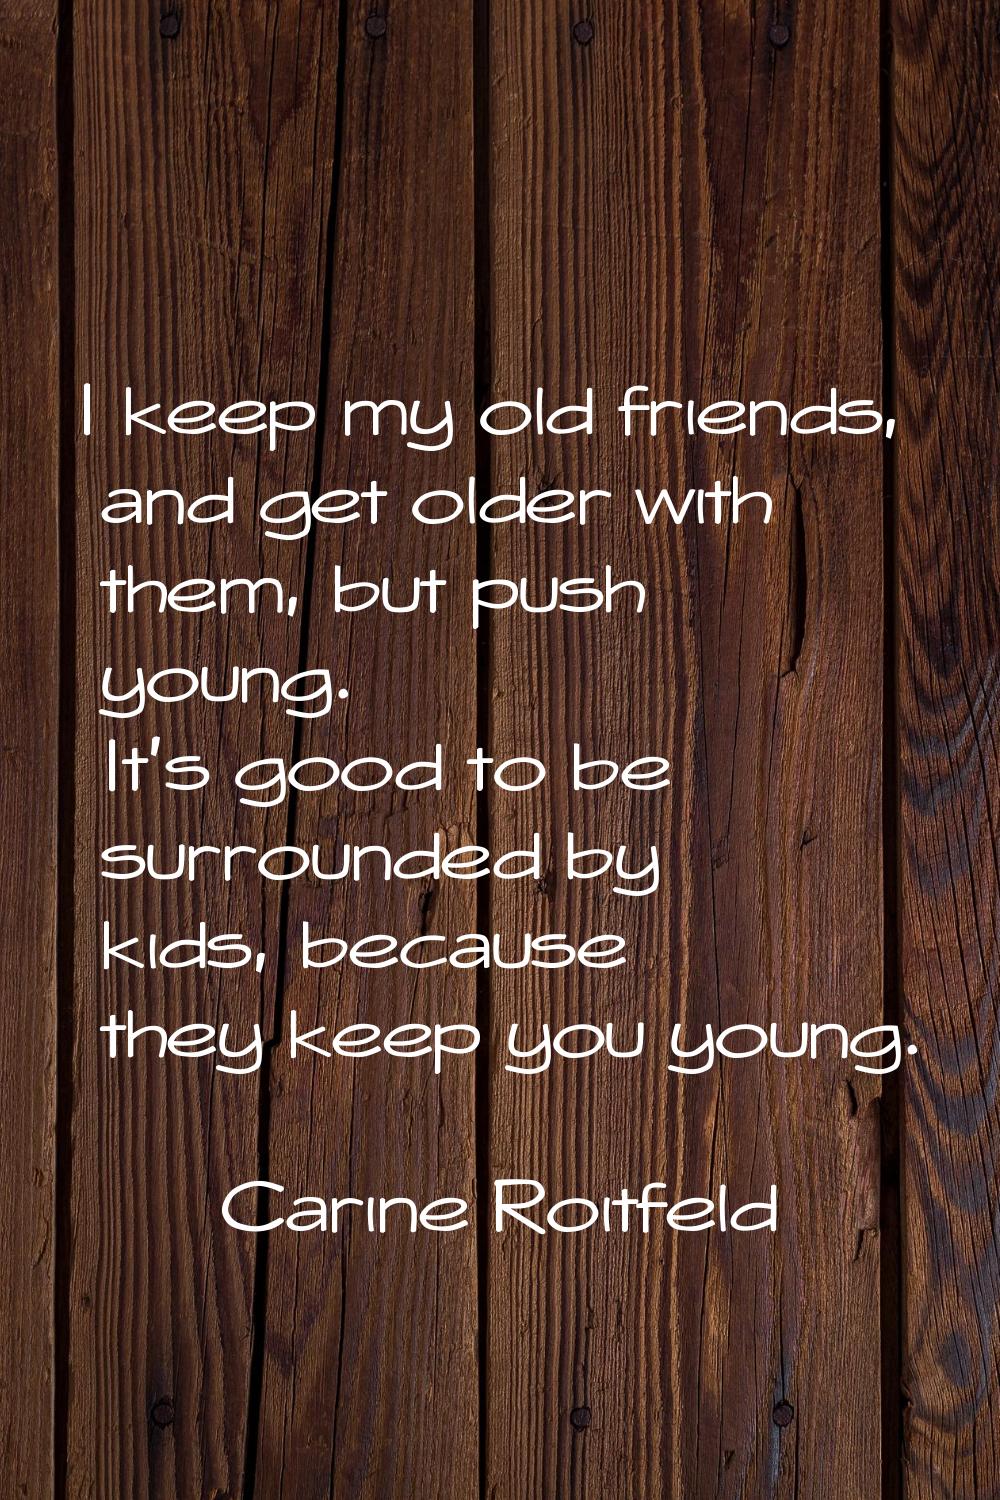 I keep my old friends, and get older with them, but push young. It's good to be surrounded by kids,